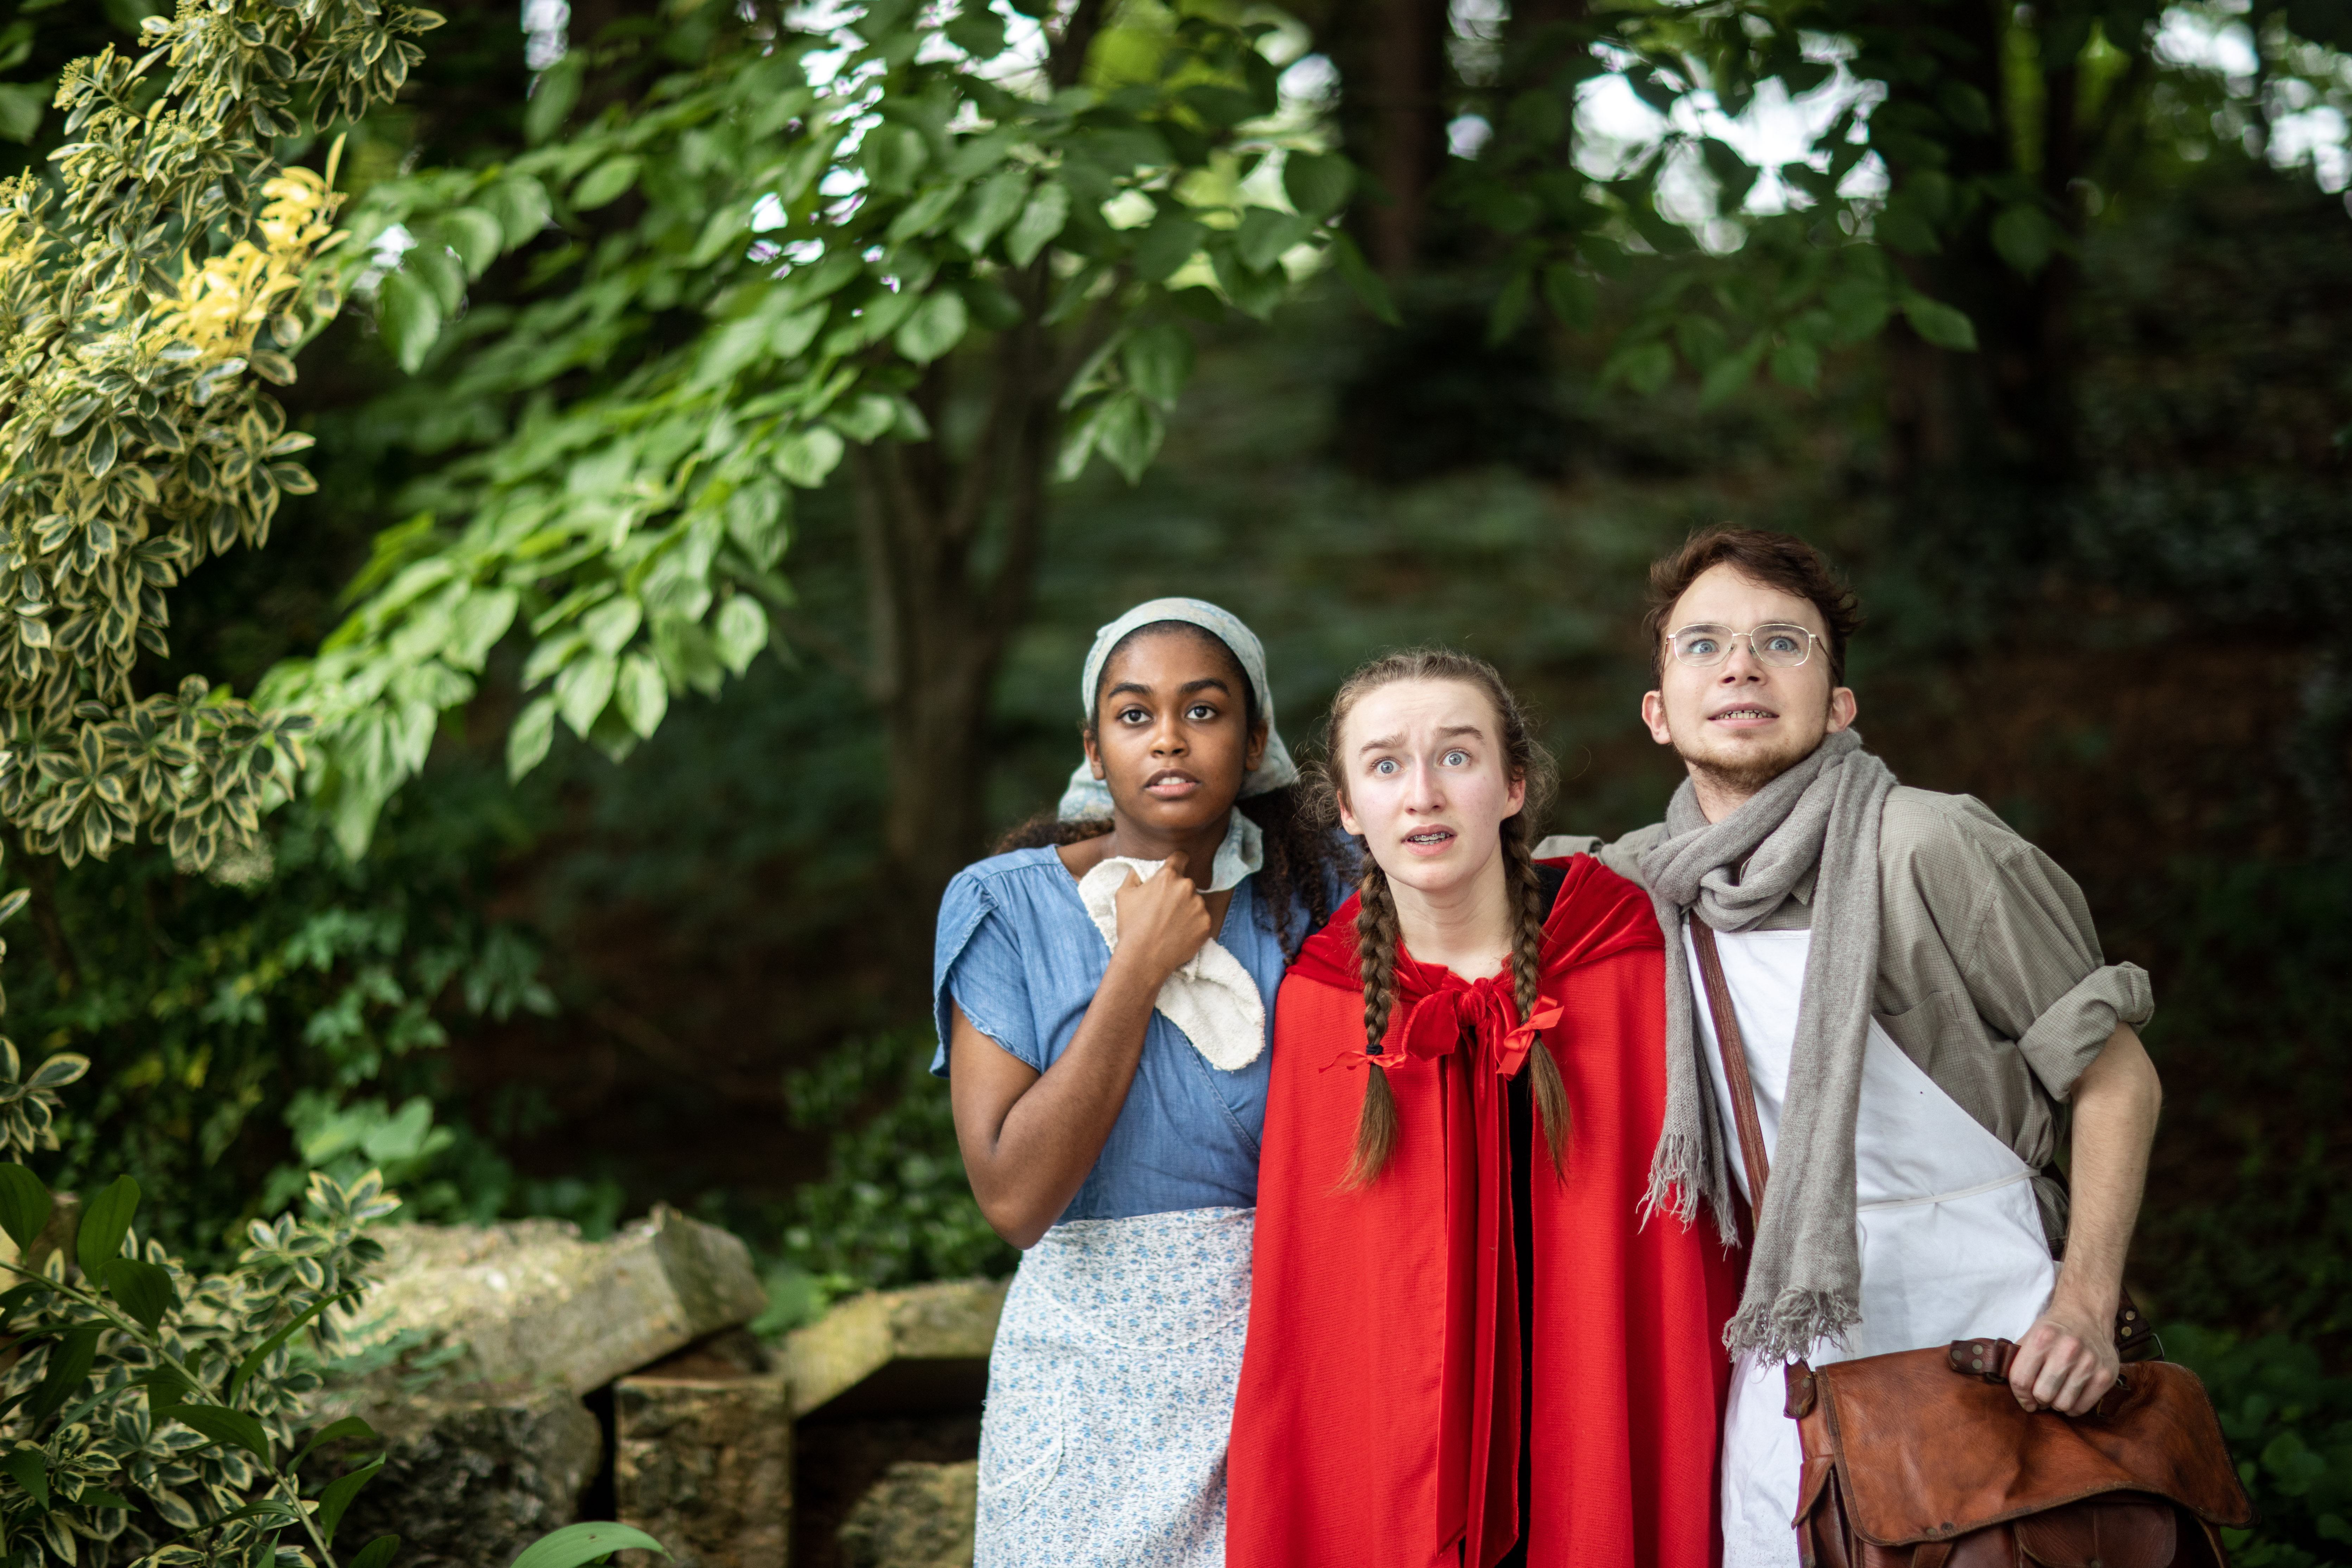  (L to R) Chloe Rogers as Cinderella, Hope King as Little Red Riding Hood, and Ezra Smith as The Baker. Photo by Jannatul Pramanik Photography.